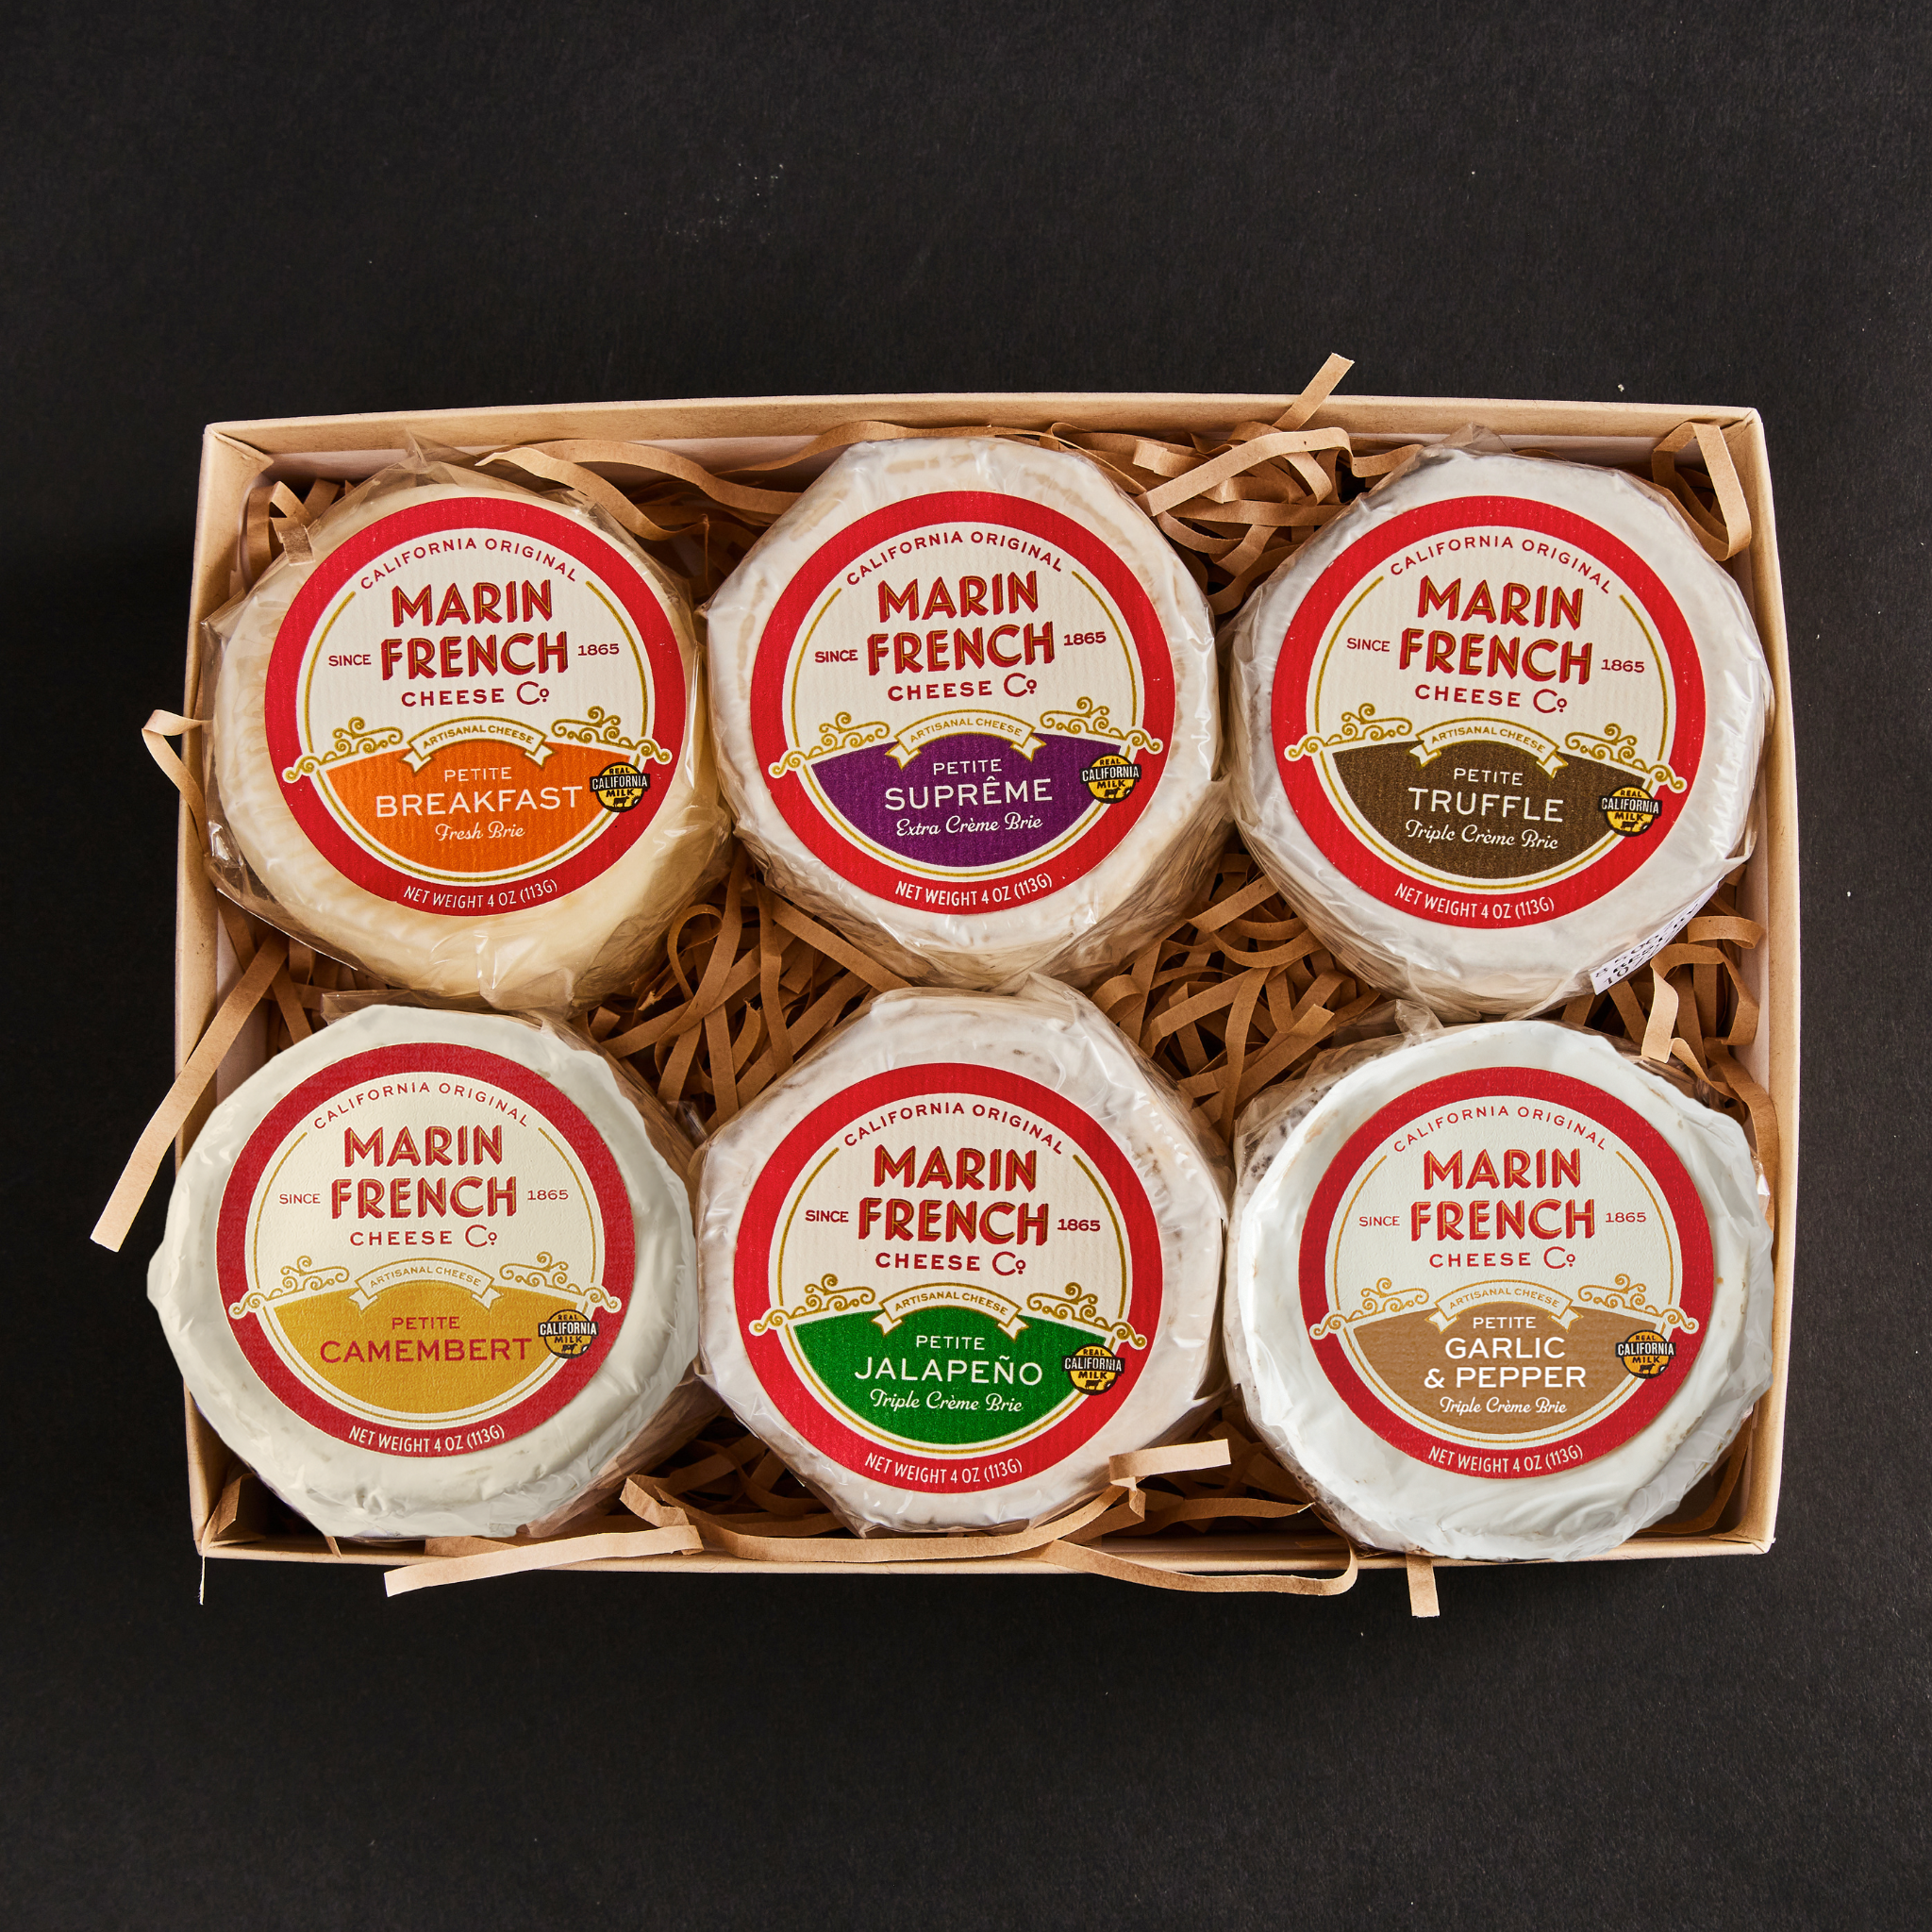 Marin French Cheese Co.'s Petite 6-Pack Box